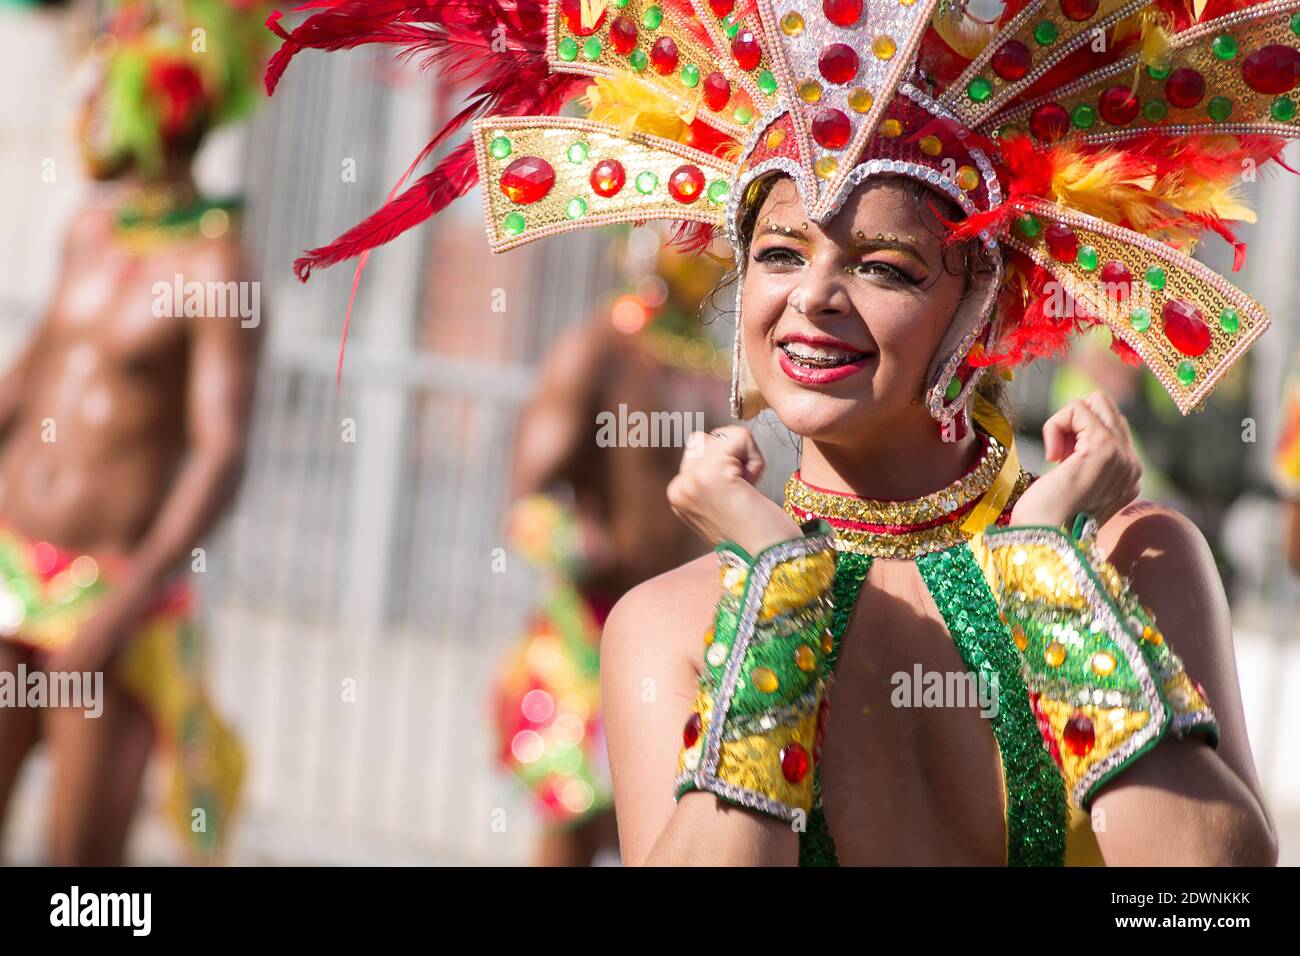 BARRANQUILLA, COLOMBIA - Feb 13, 2018: The comparsa parades their traditional colorful costumes at the Barranquilla carnival Stock Photo